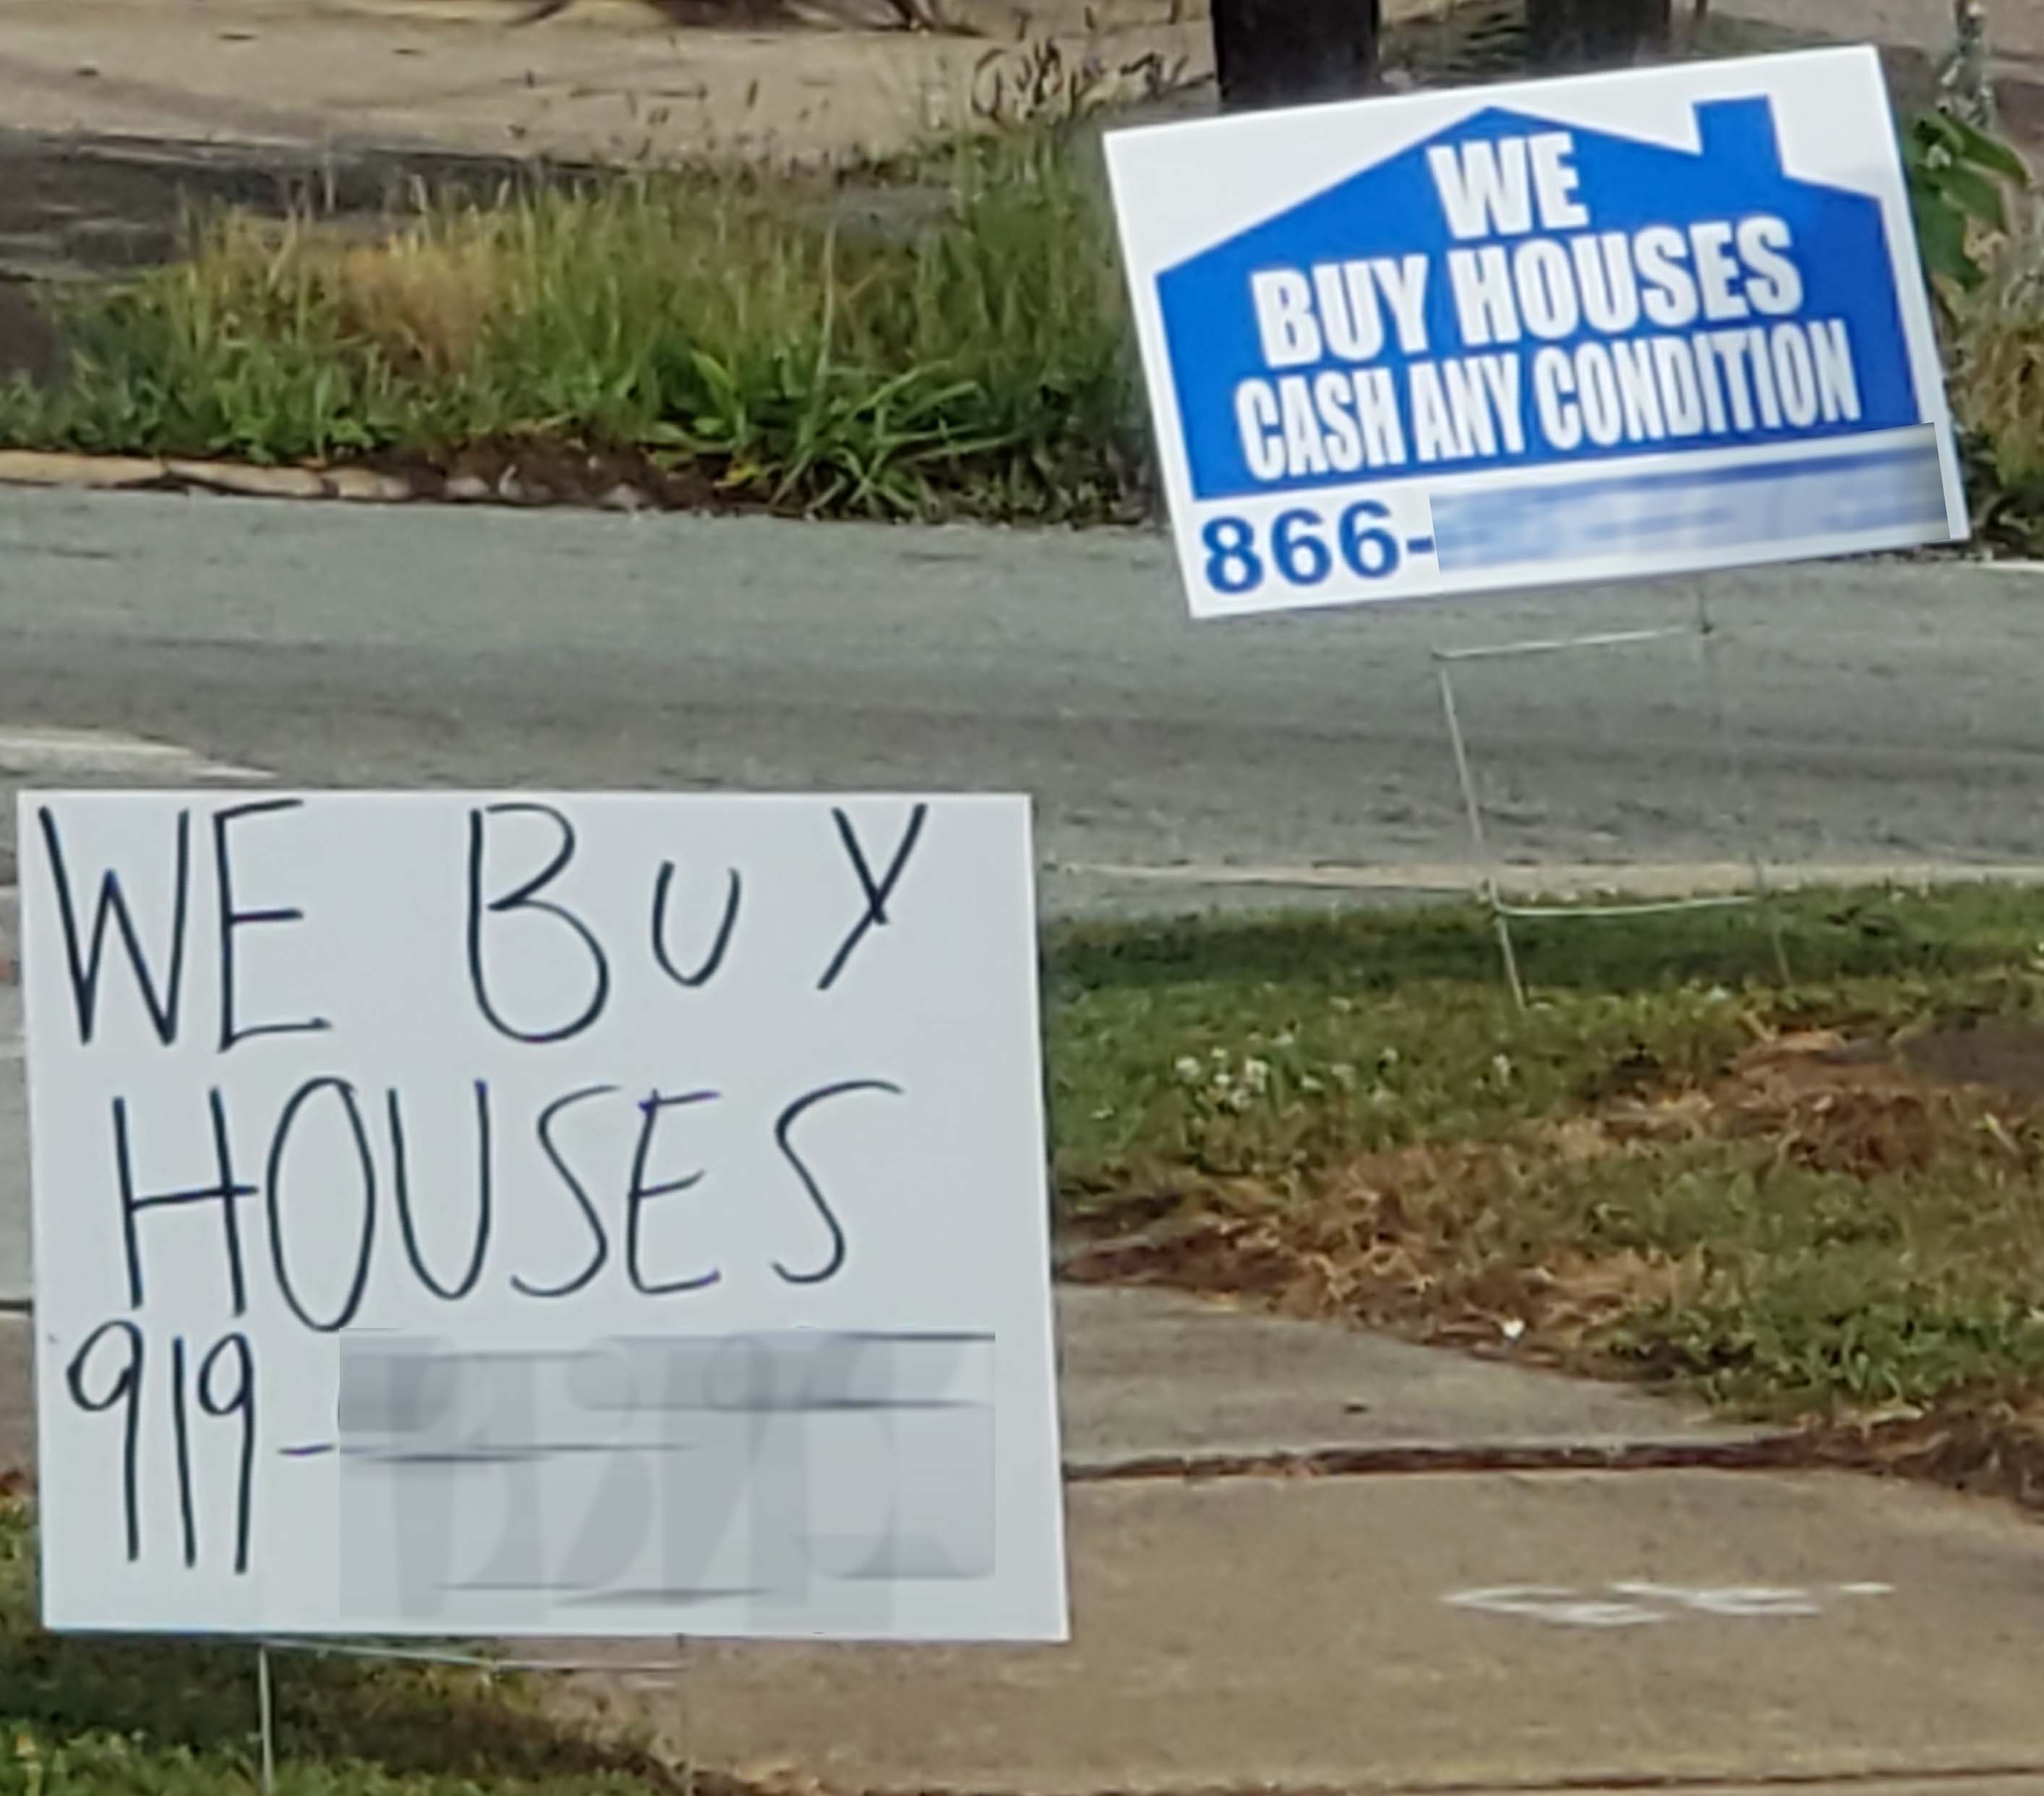 A lawn sign reads: We Buy Houses. Cash. Any condition. Another handwritten lawn sign reads: We Buy Houses.